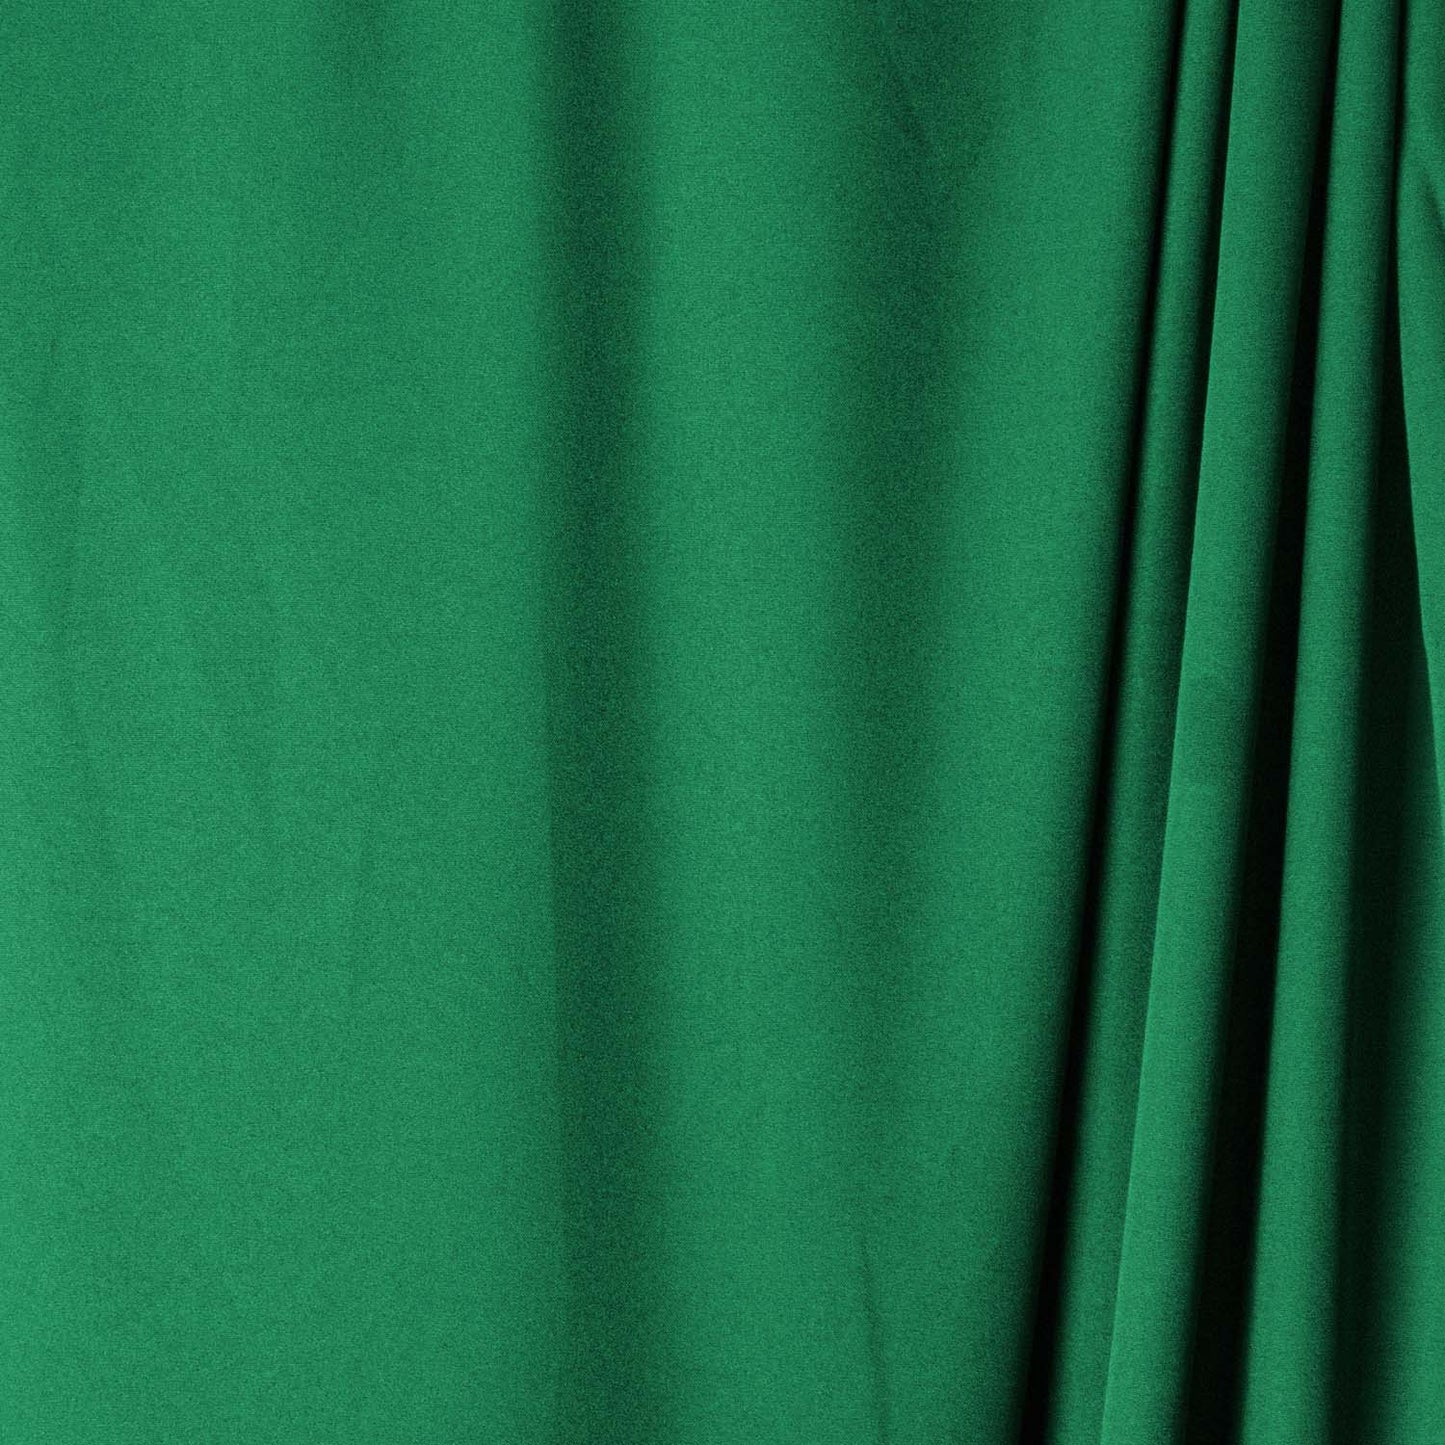 Chroma Green Solid Wrinkle Resistant Backdrop